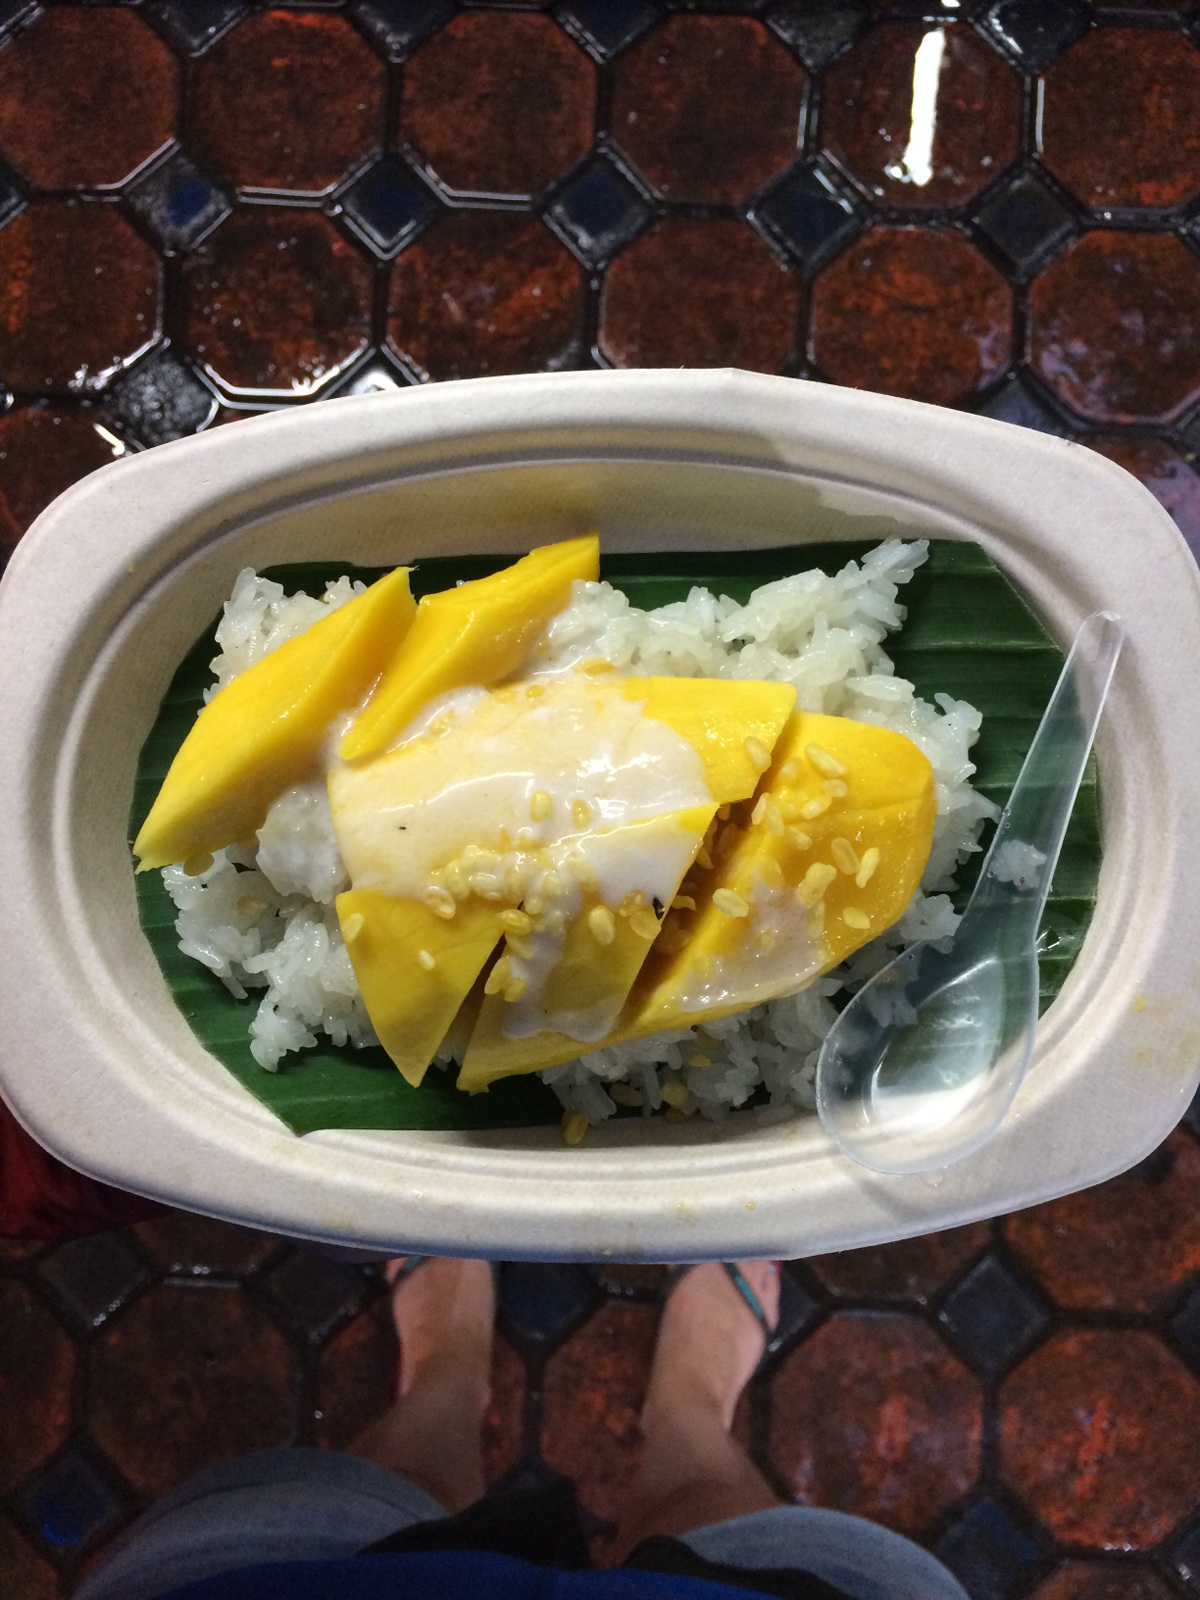 Another installment of the mango sticky rice obsession (Chiang Mai Market) 